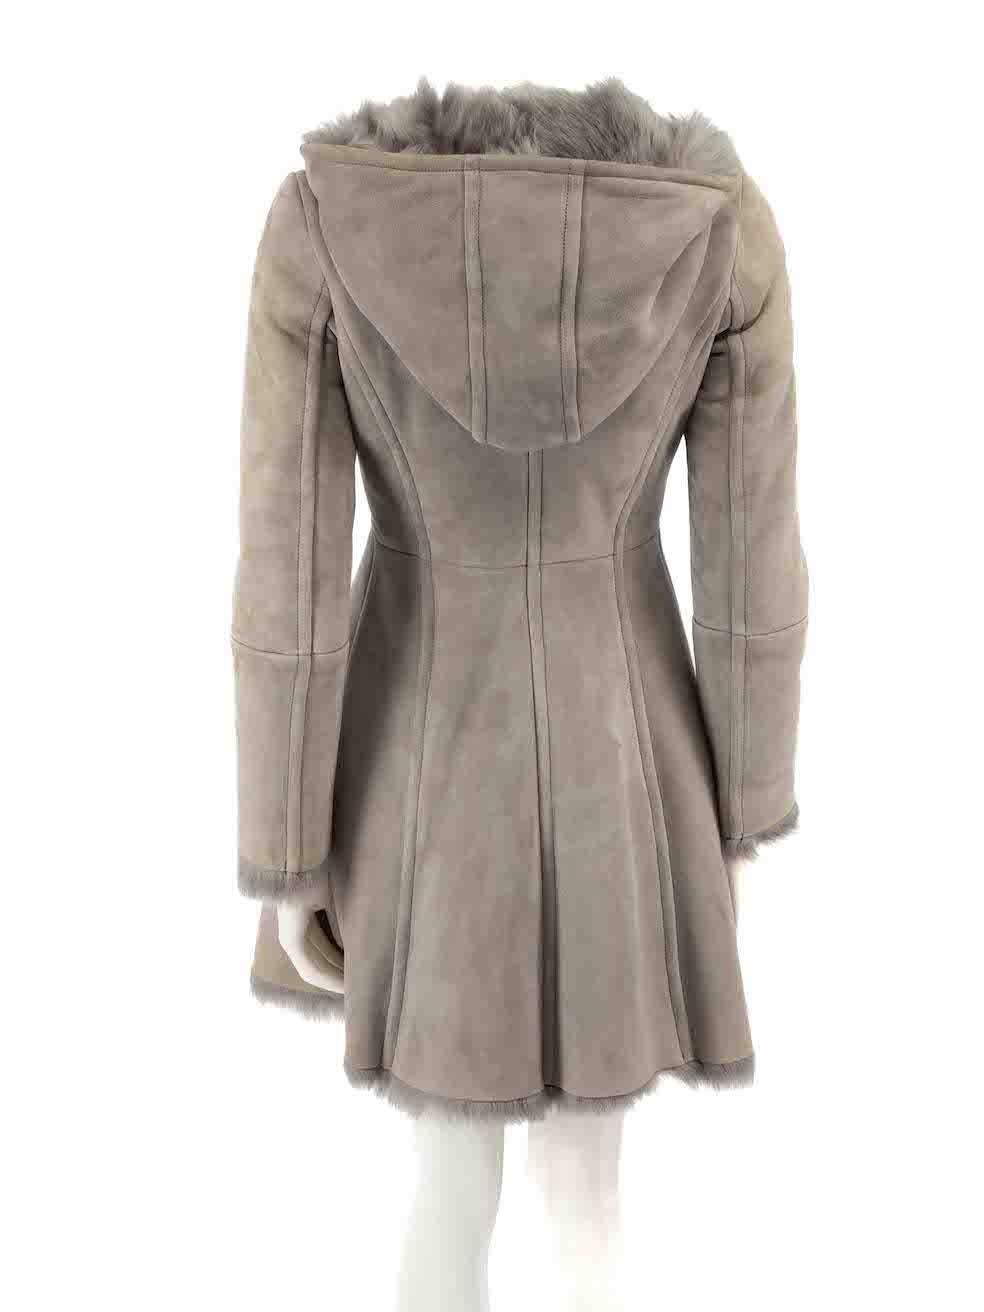 Prada Grey Suede Mid-Length Shearling Lined Coat Size XS In Good Condition For Sale In London, GB